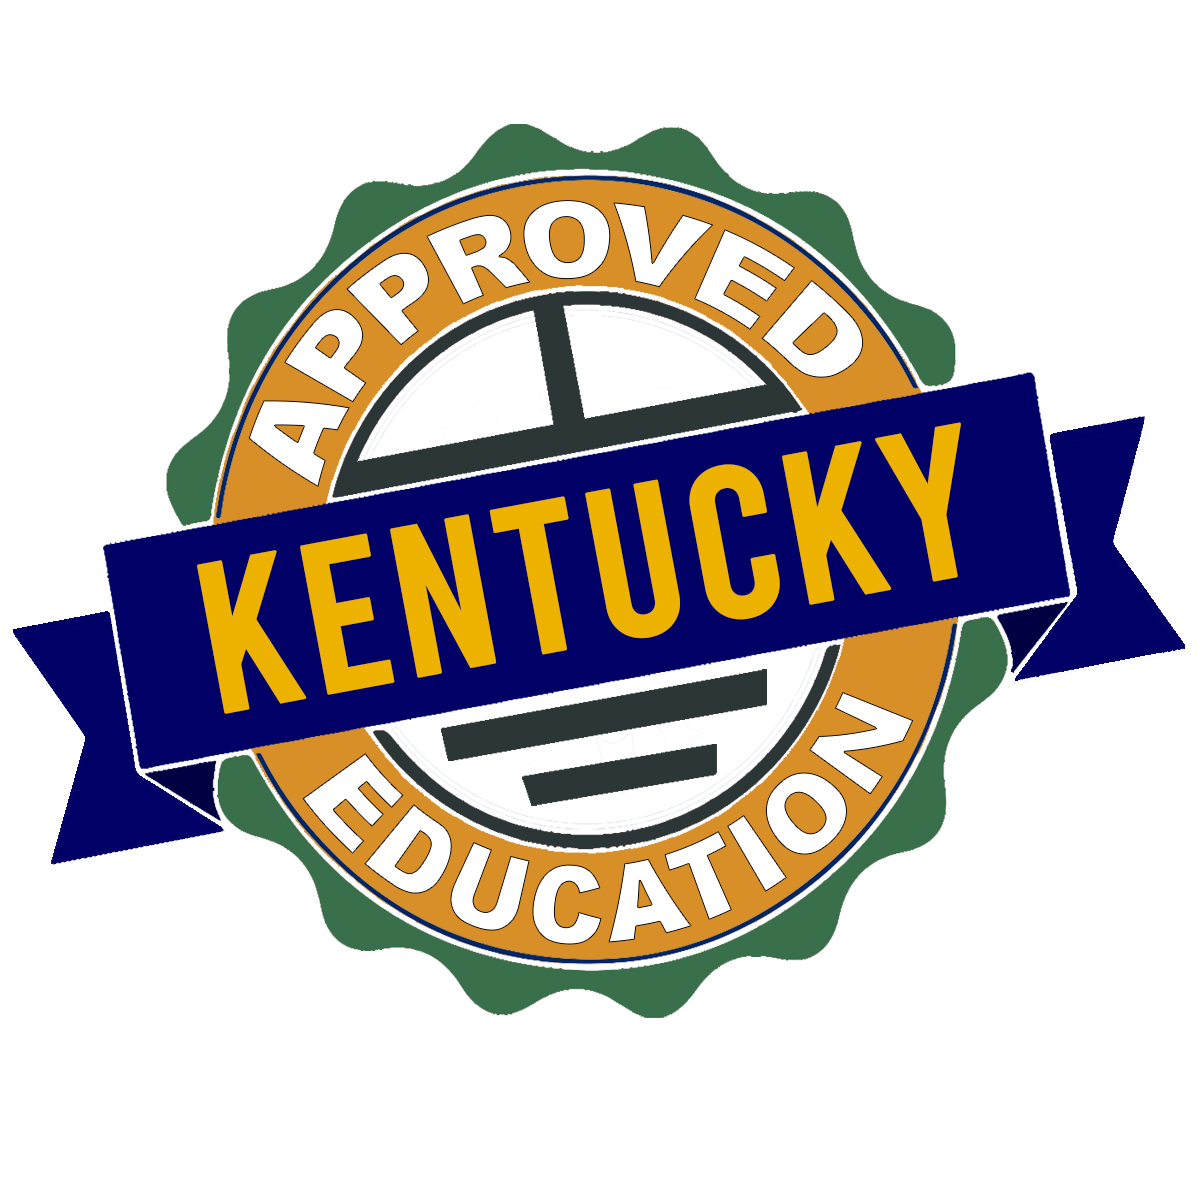 Approved Kentucky Electrical Continuing Education Badge